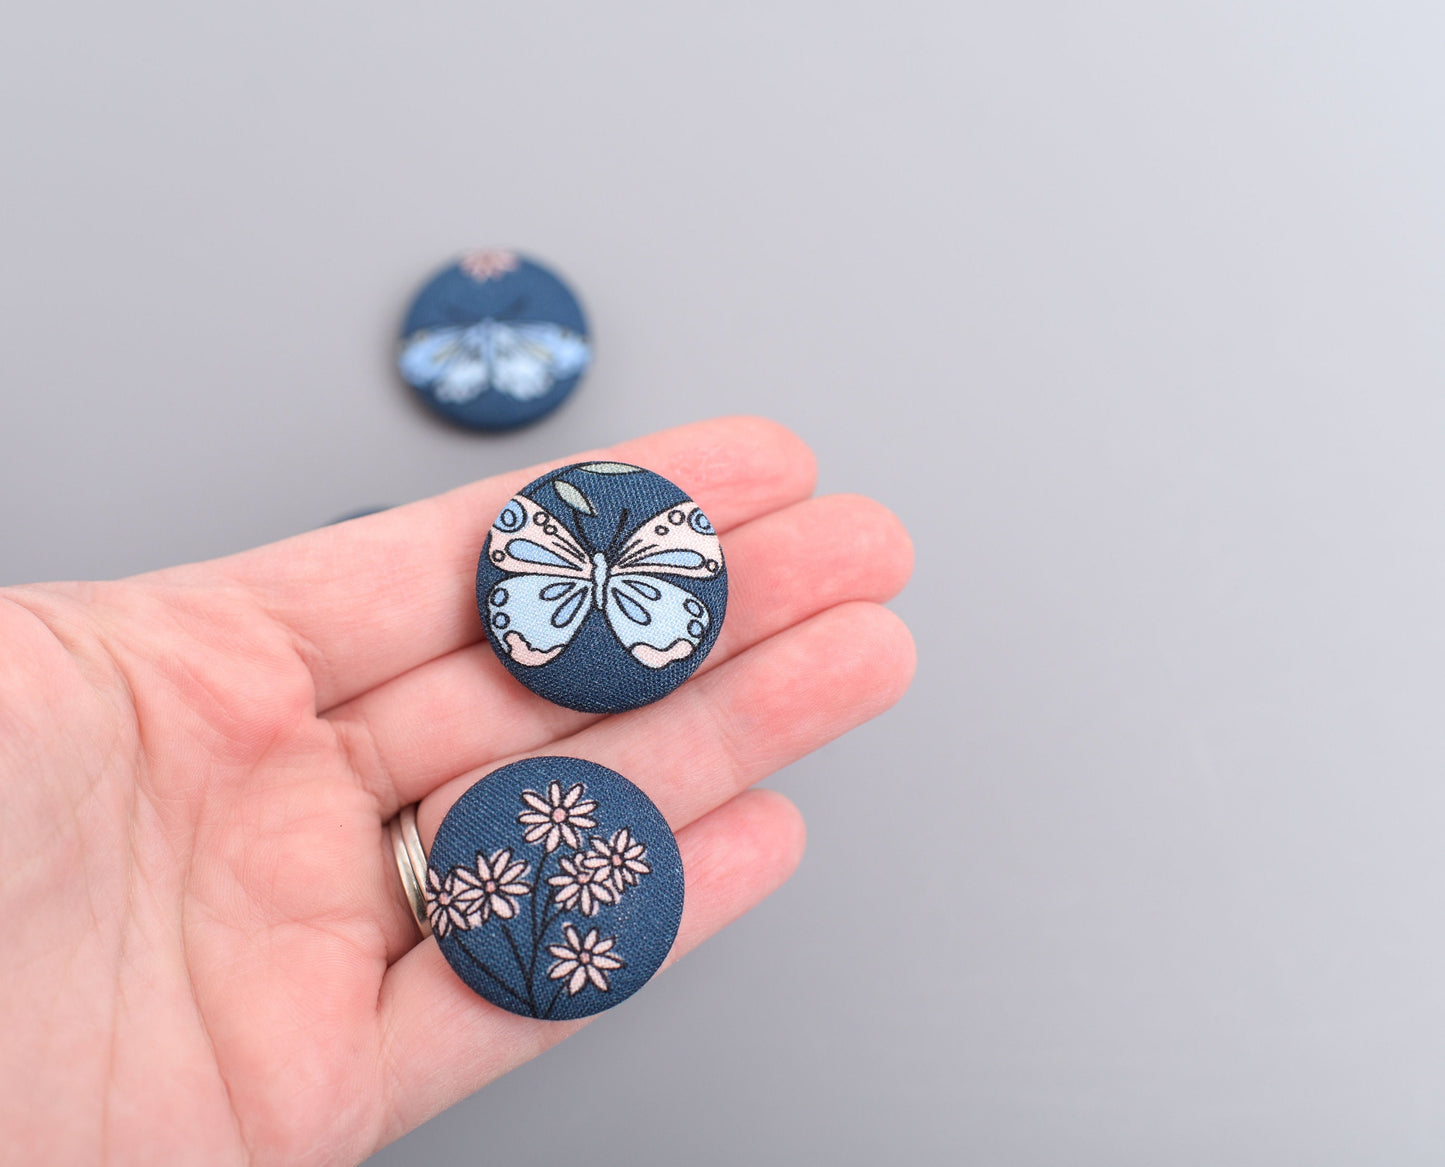 Blue Butterfly Fabric Button Magnets- Set of 6